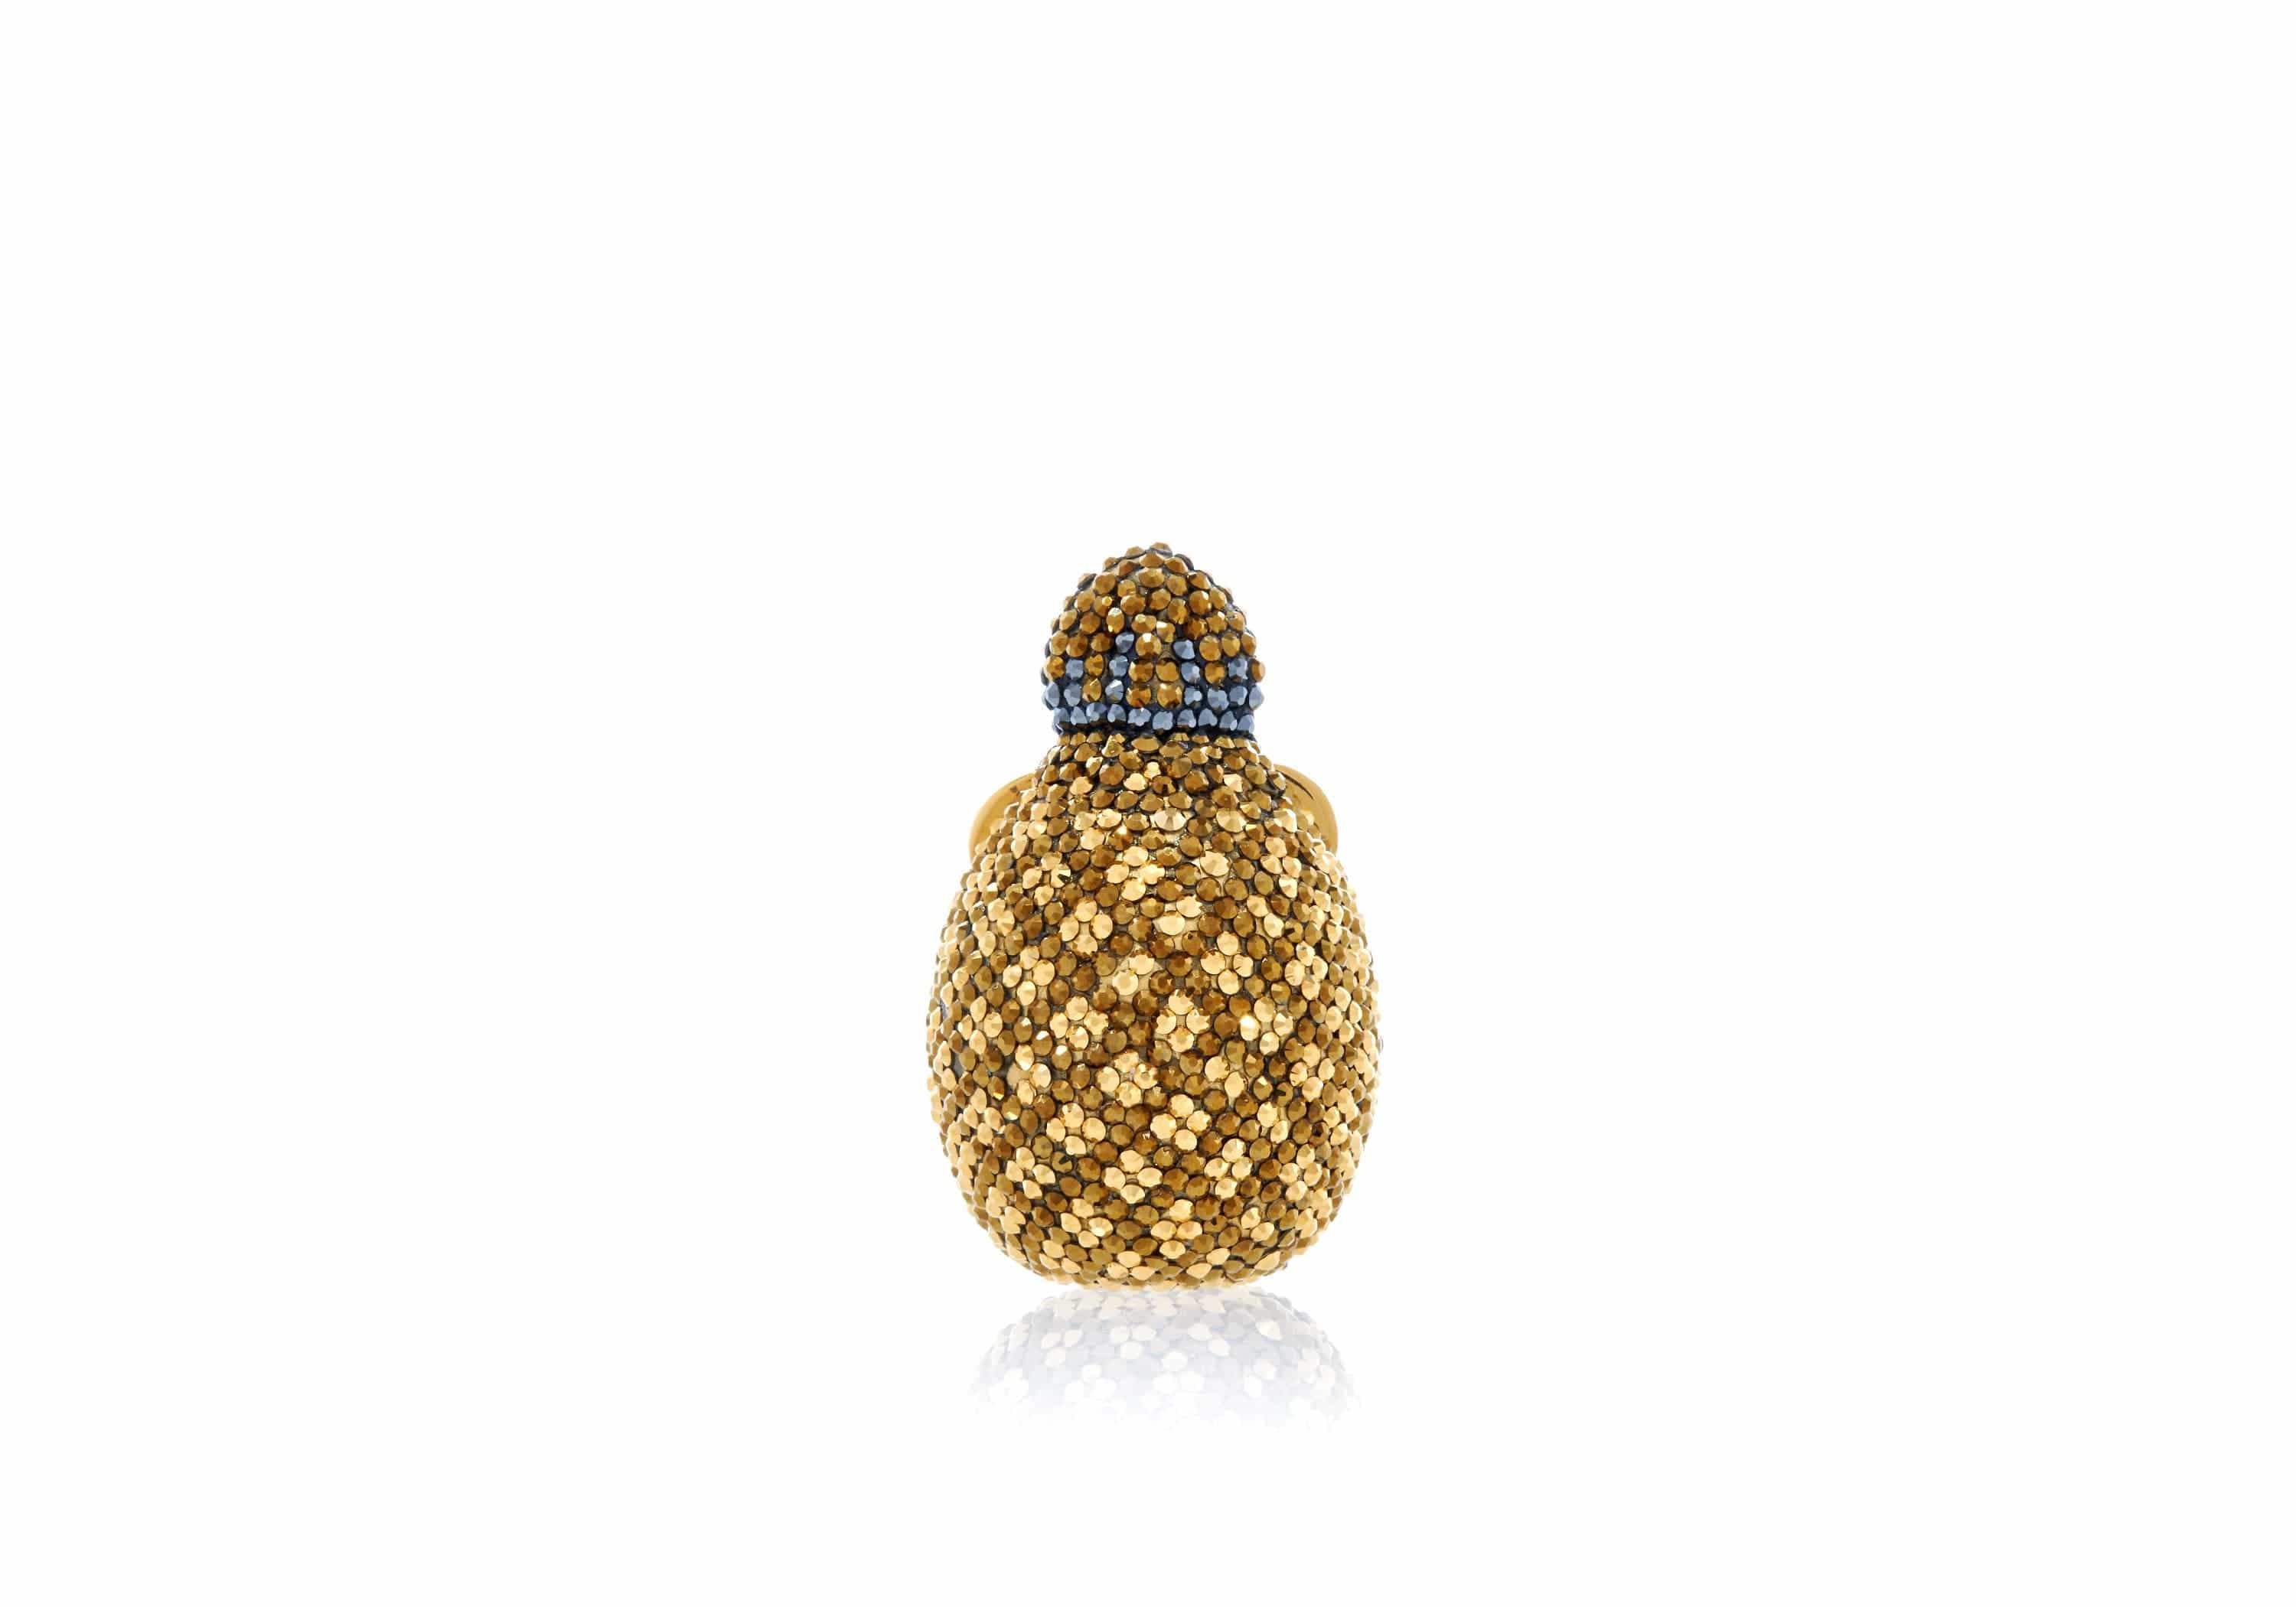 Judith Leiber Couture Pineapple Crystal Pillbox, Champagne, Women's, Clutches & Small Handbags Pillboxes